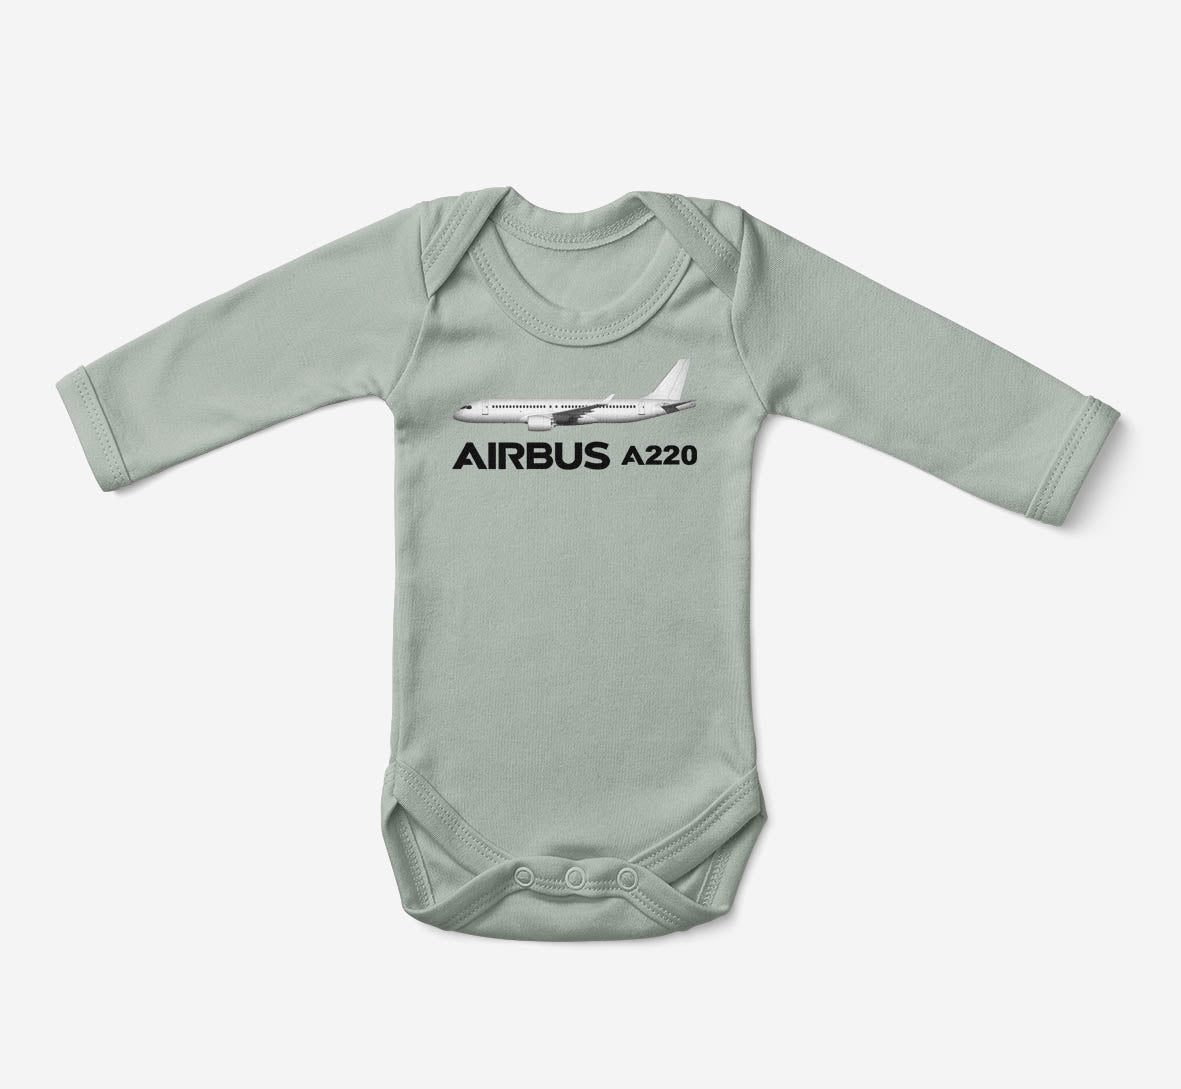 The Airbus A220 Designed Baby Bodysuits